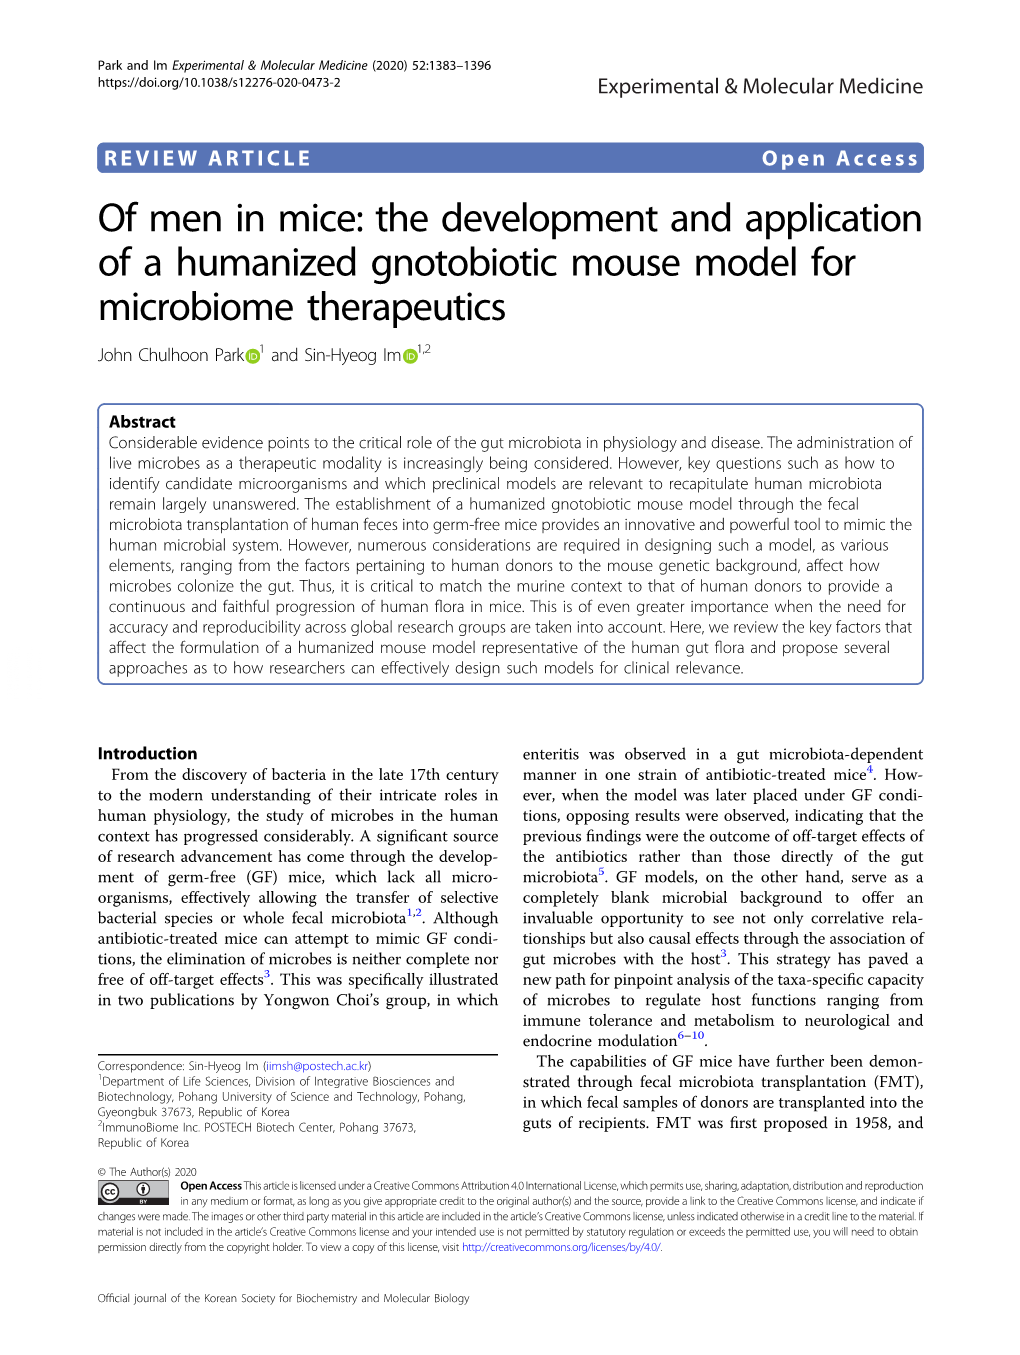 Of Men in Mice: the Development and Application of a Humanized Gnotobiotic Mouse Model for Microbiome Therapeutics John Chulhoon Park 1 and Sin-Hyeog Im 1,2